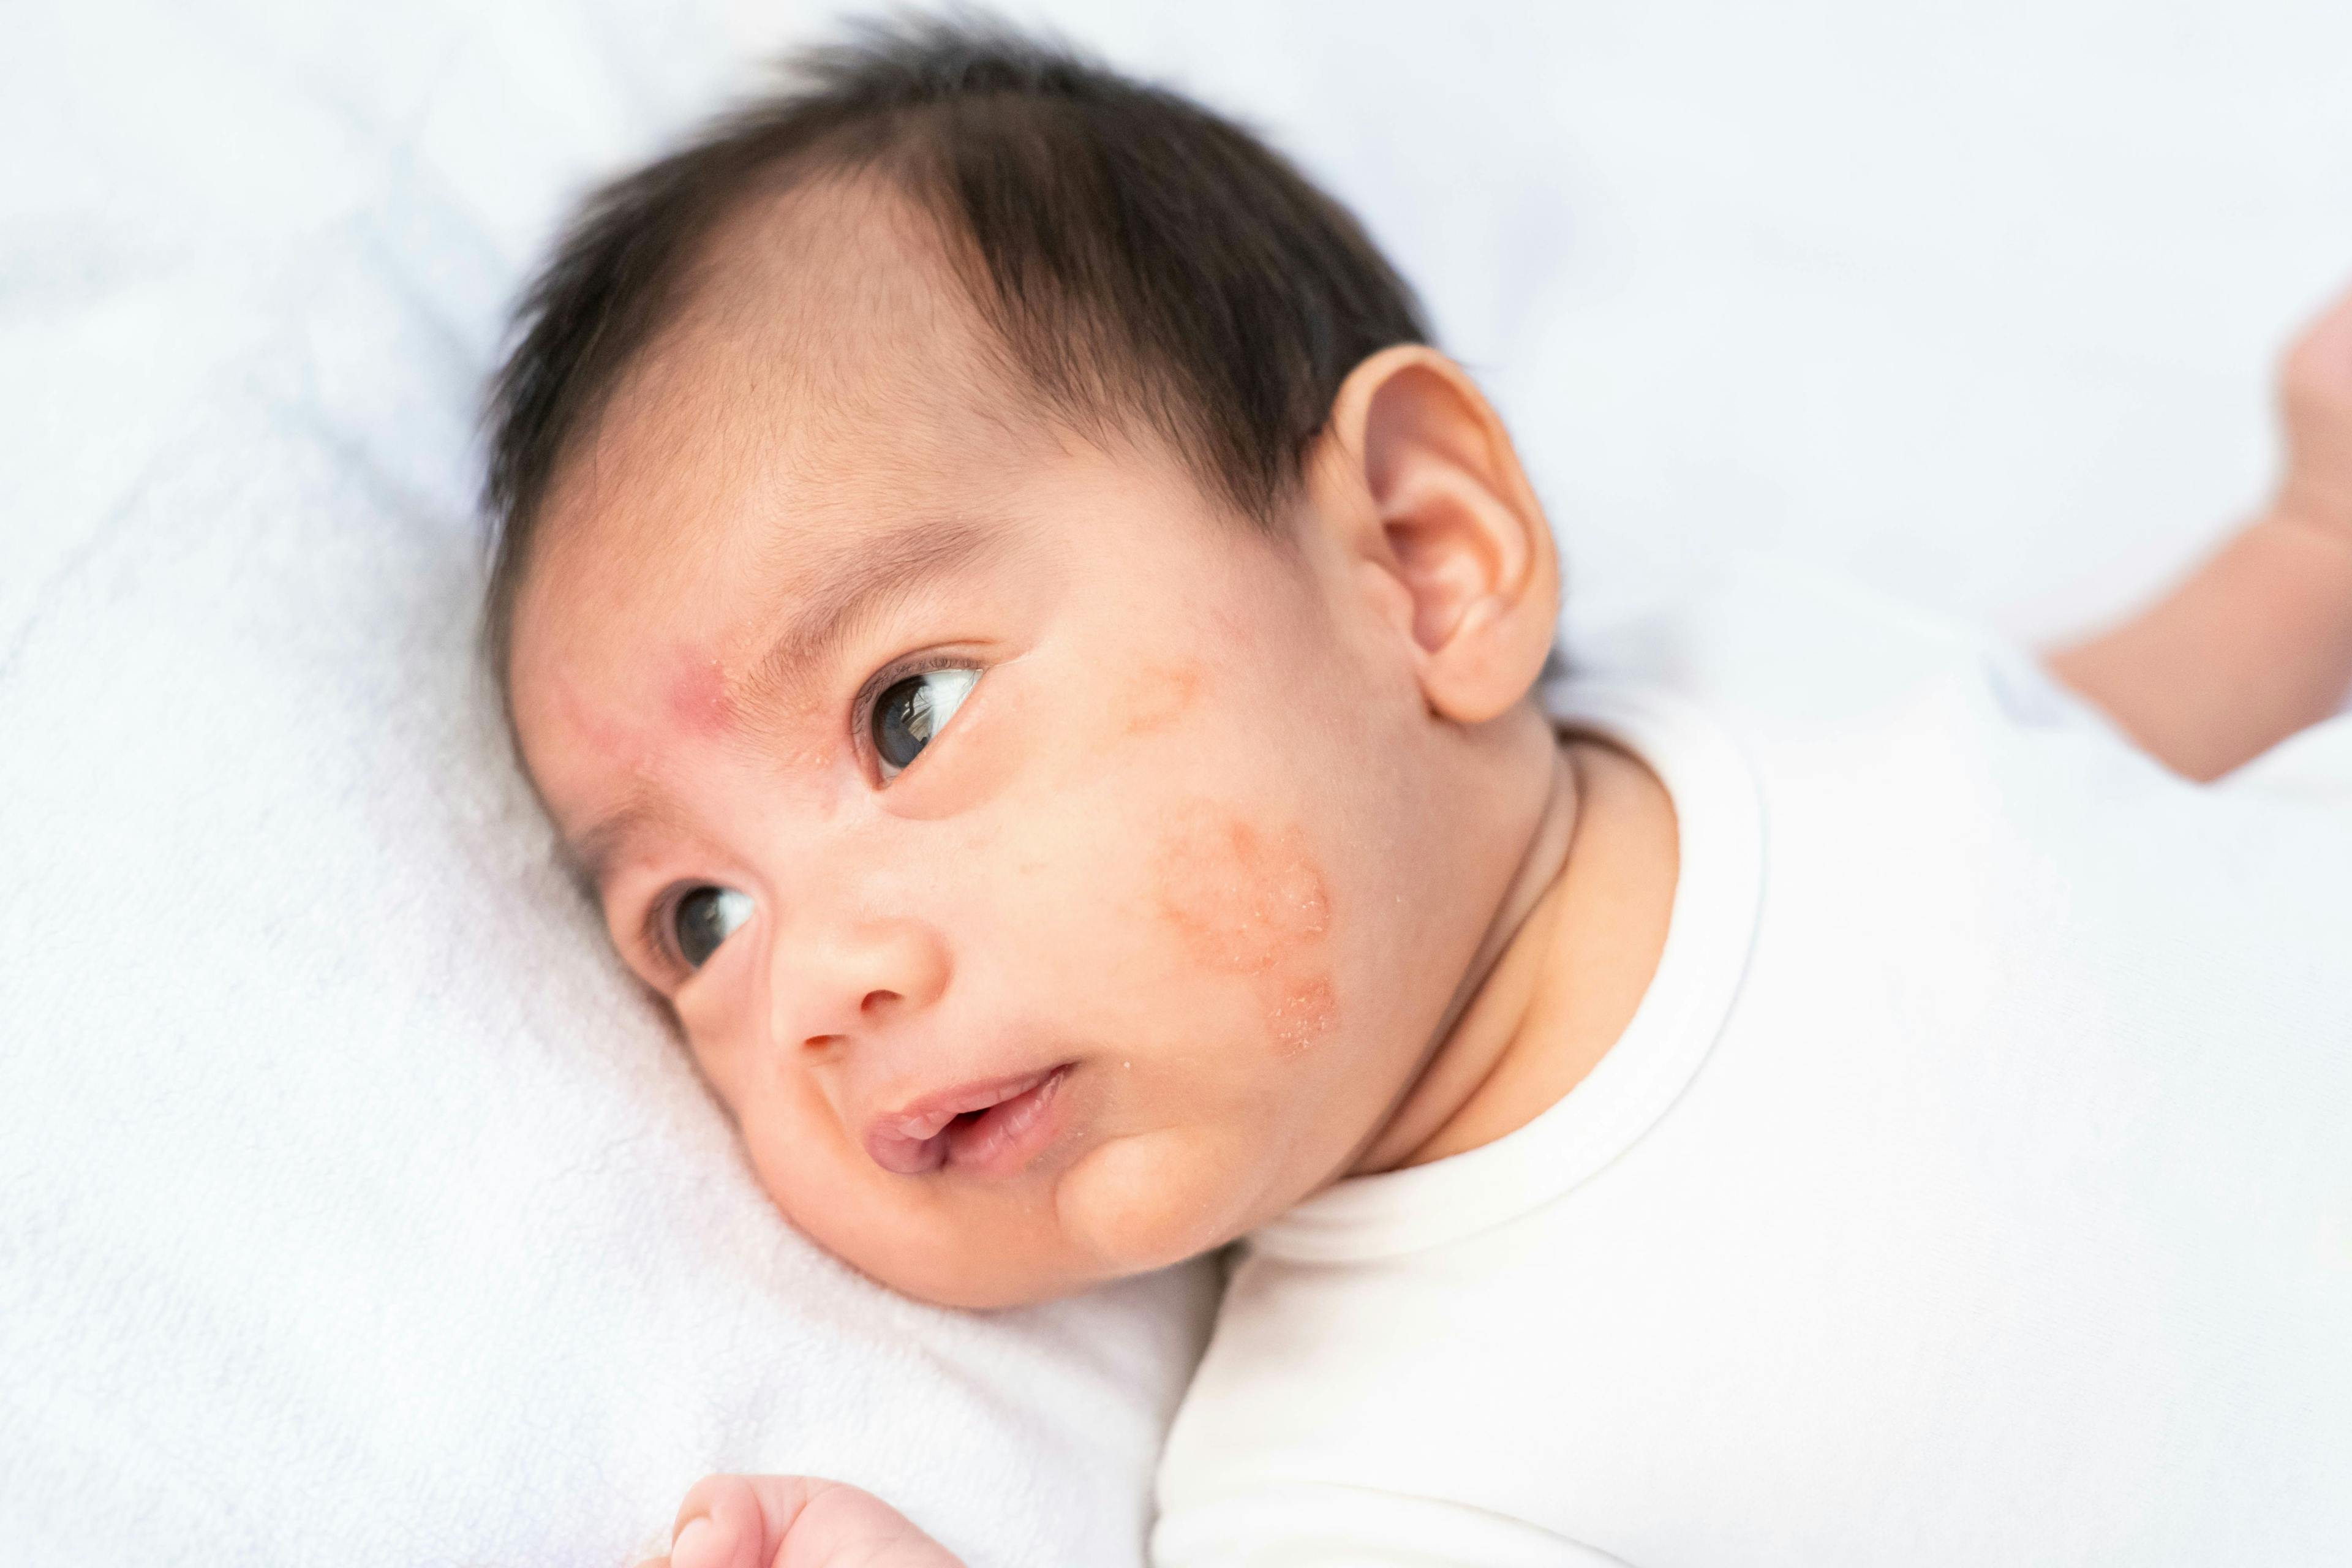 Eczema Associated With Heightened Risk of Peanut Allergy in Infants